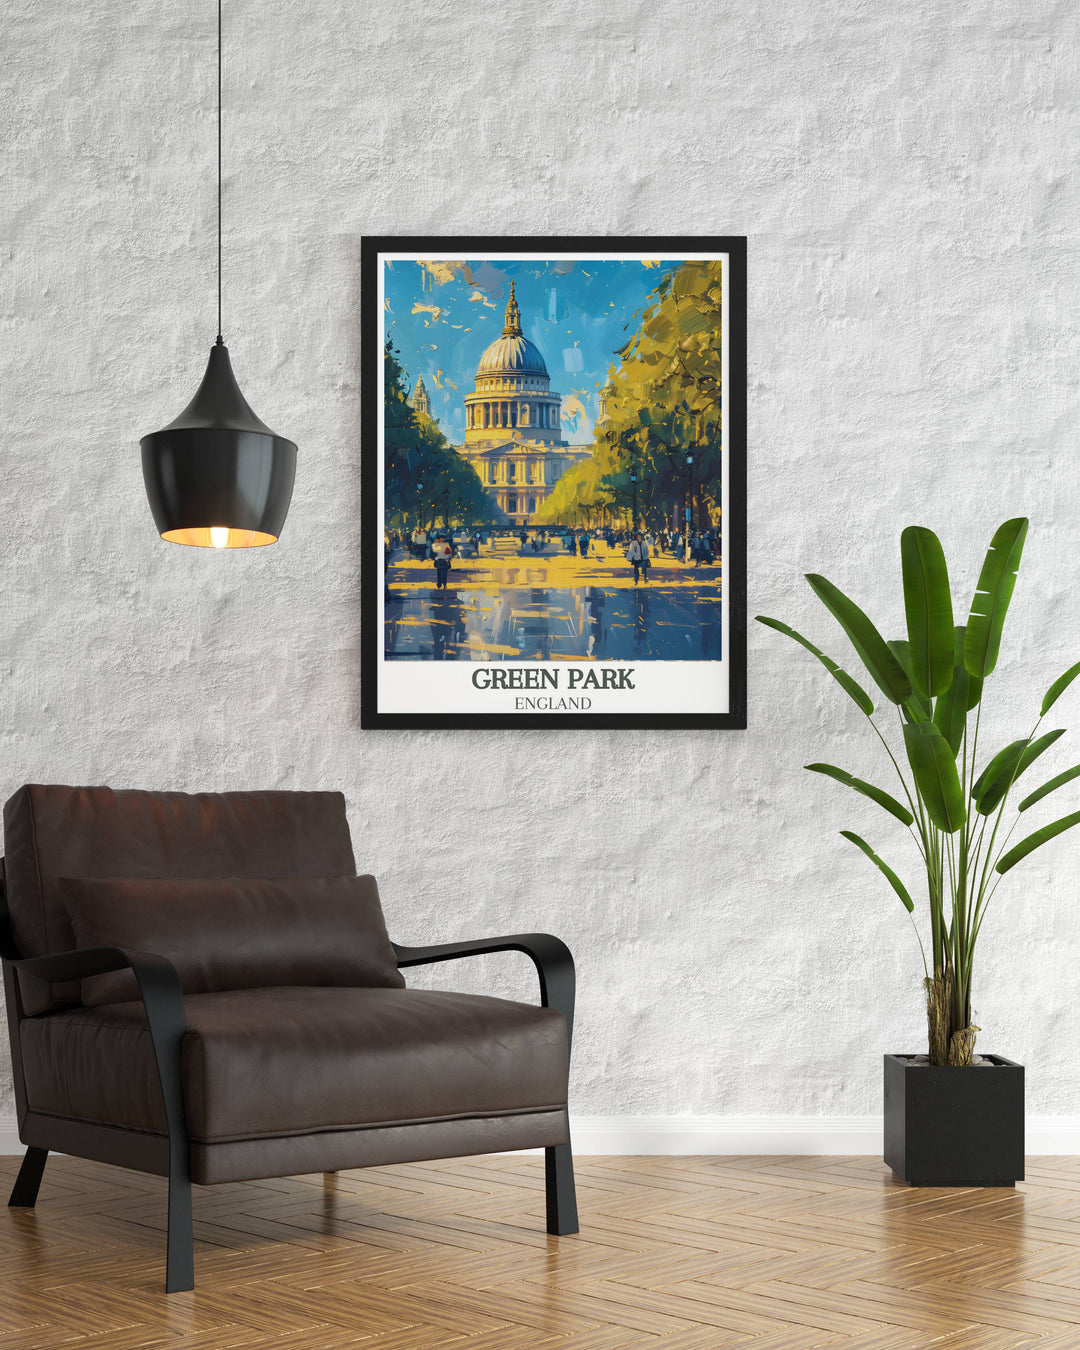 London travel poster featuring Constitution Hill and Green Park with a focus on the pathway leading to Hyde Park a stunning addition to any collection of London wall art and Royal Parks artwork.